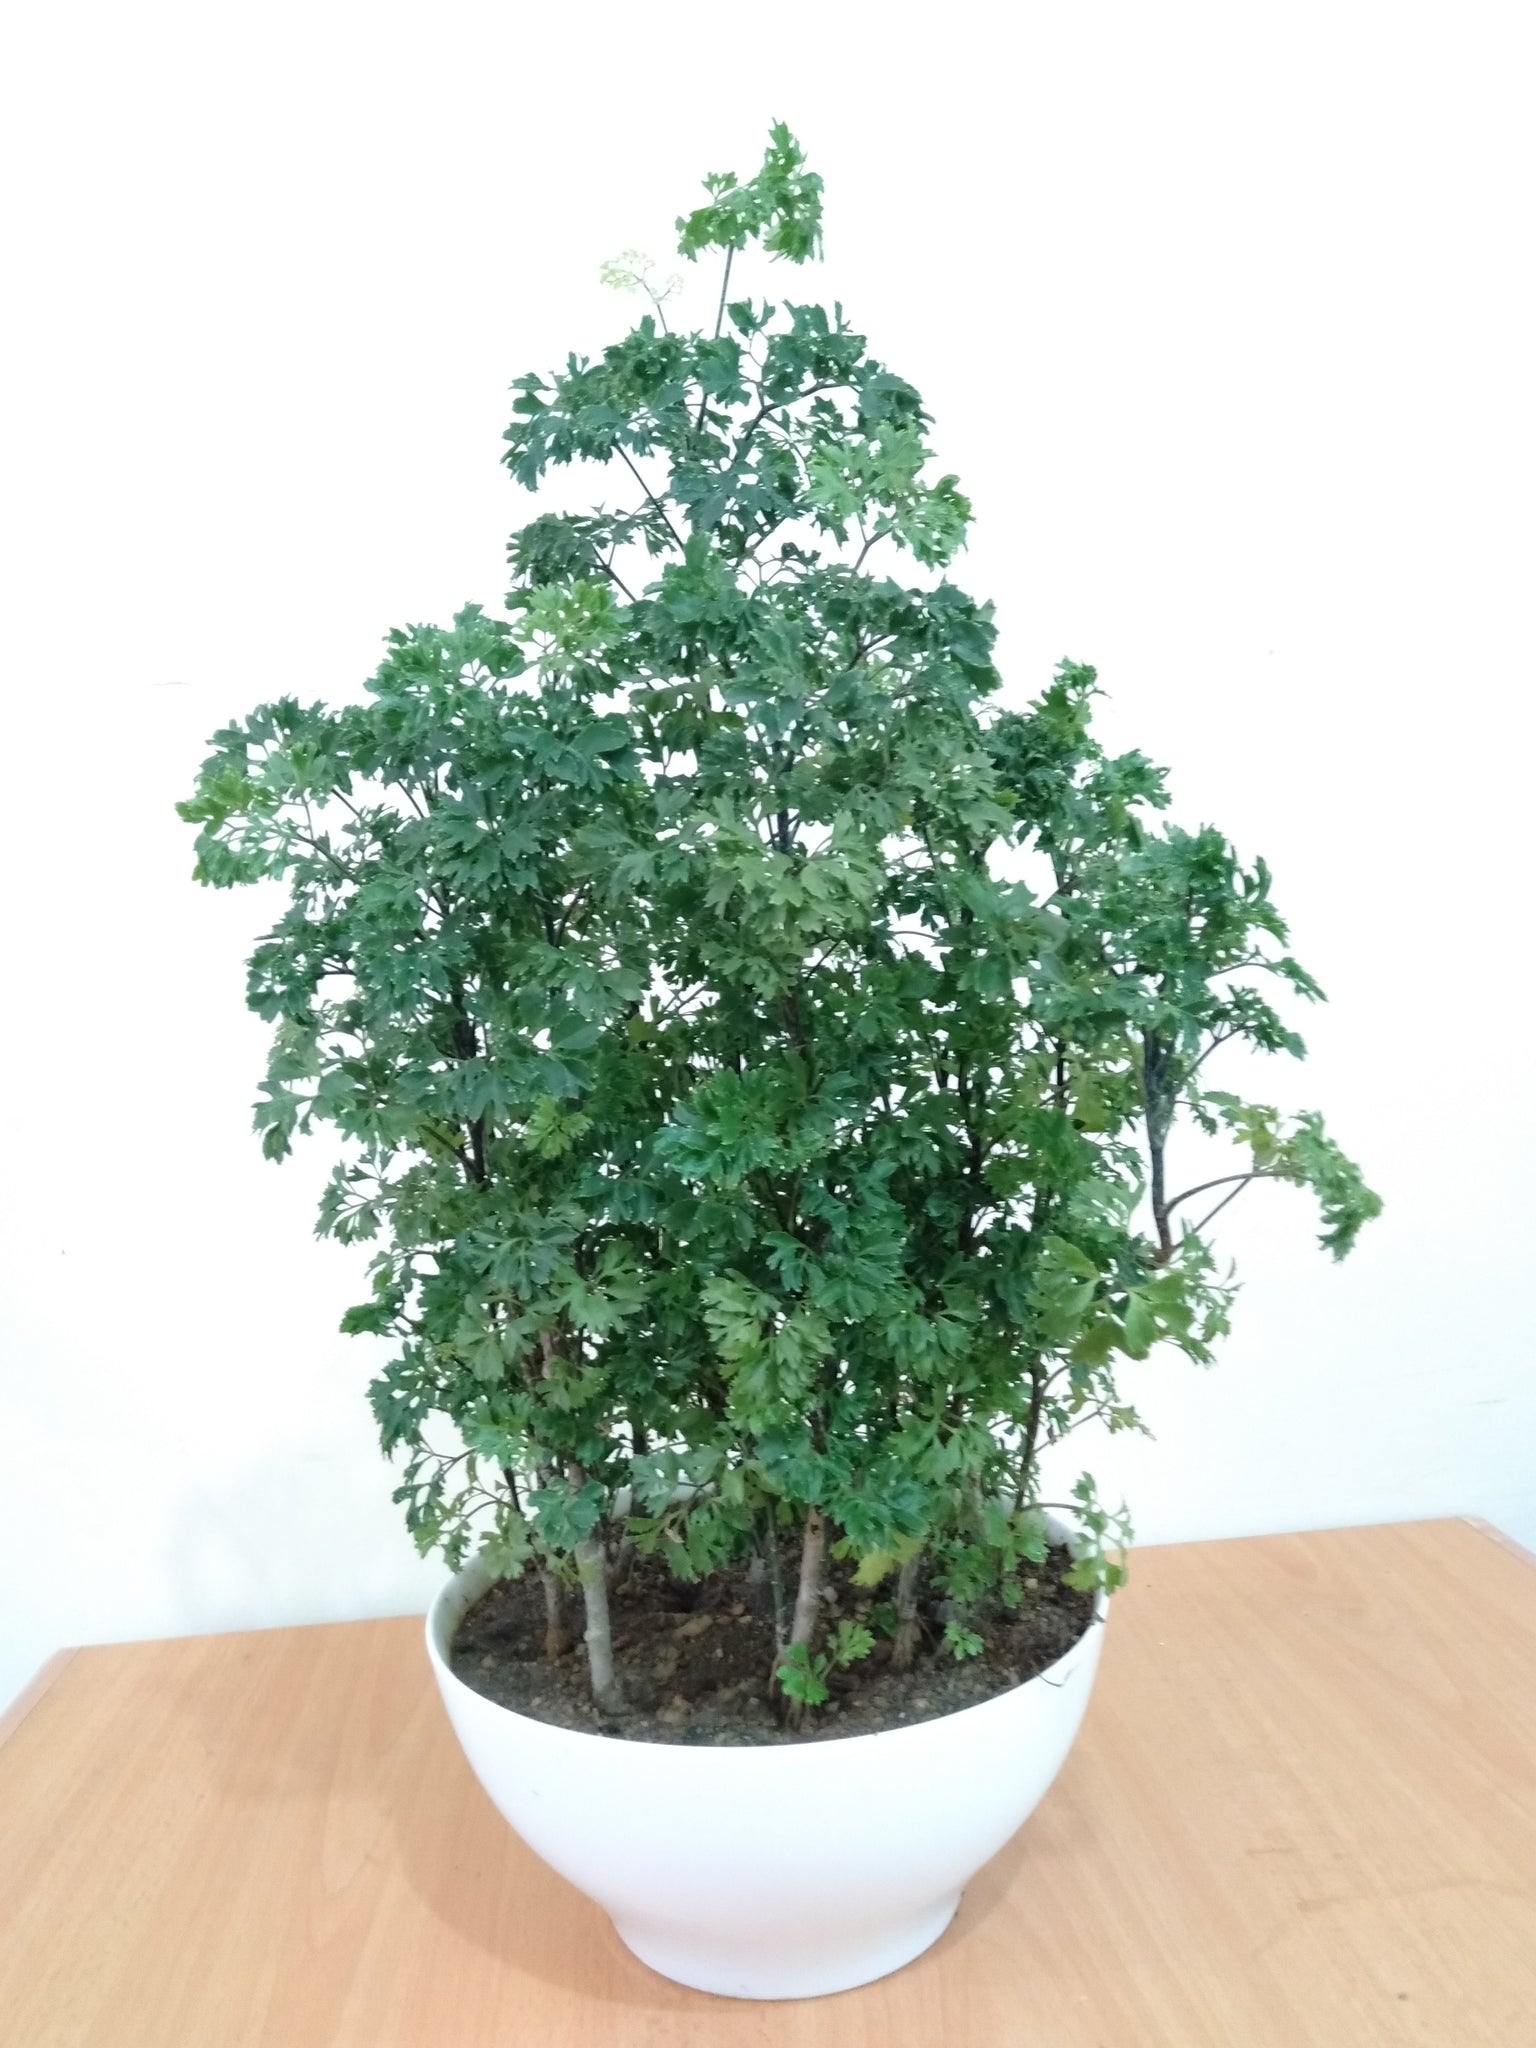 Polyscias fruticosa Plant in Porcelain Pot : 15 to 20 Inches (Plant Height)